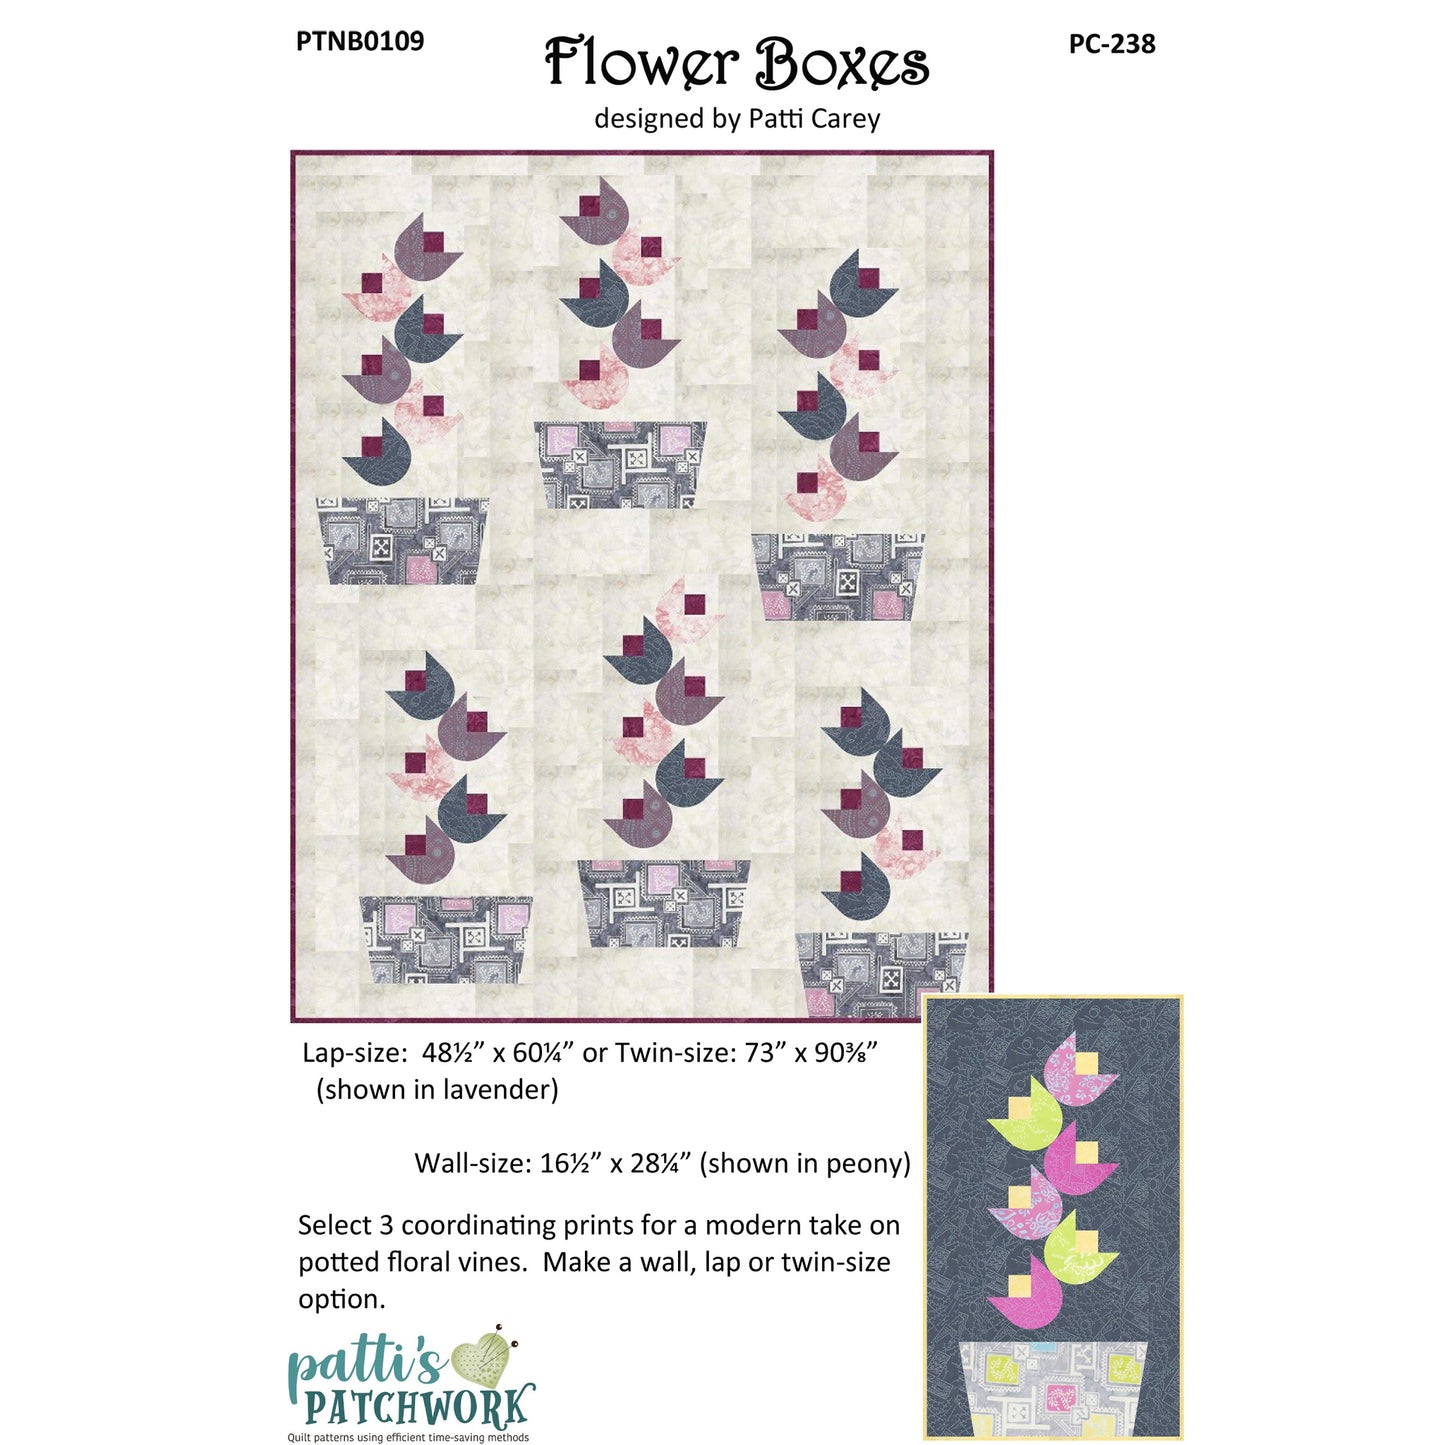 Cover image of pattern for Flower Pots quilt and wall hanging.